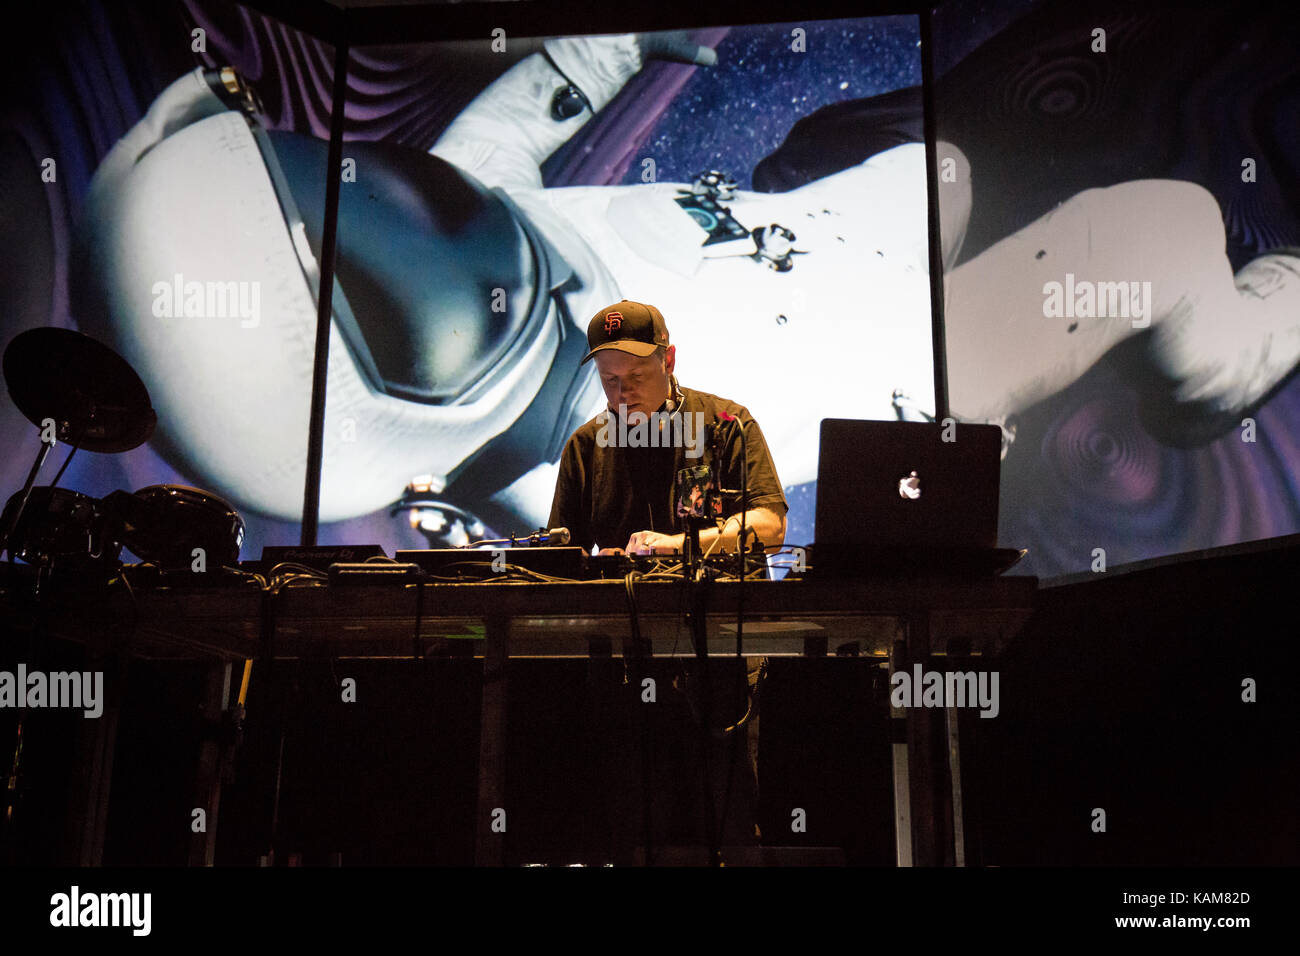 Norway, Oslo – September 14, 2017. The American record producer, DJ and turntablist DJ Shadow performs a live concert at Rockefeller in Oslo. (Photo credit: Gonzales Photo / Tord Litleskare). Stock Photo